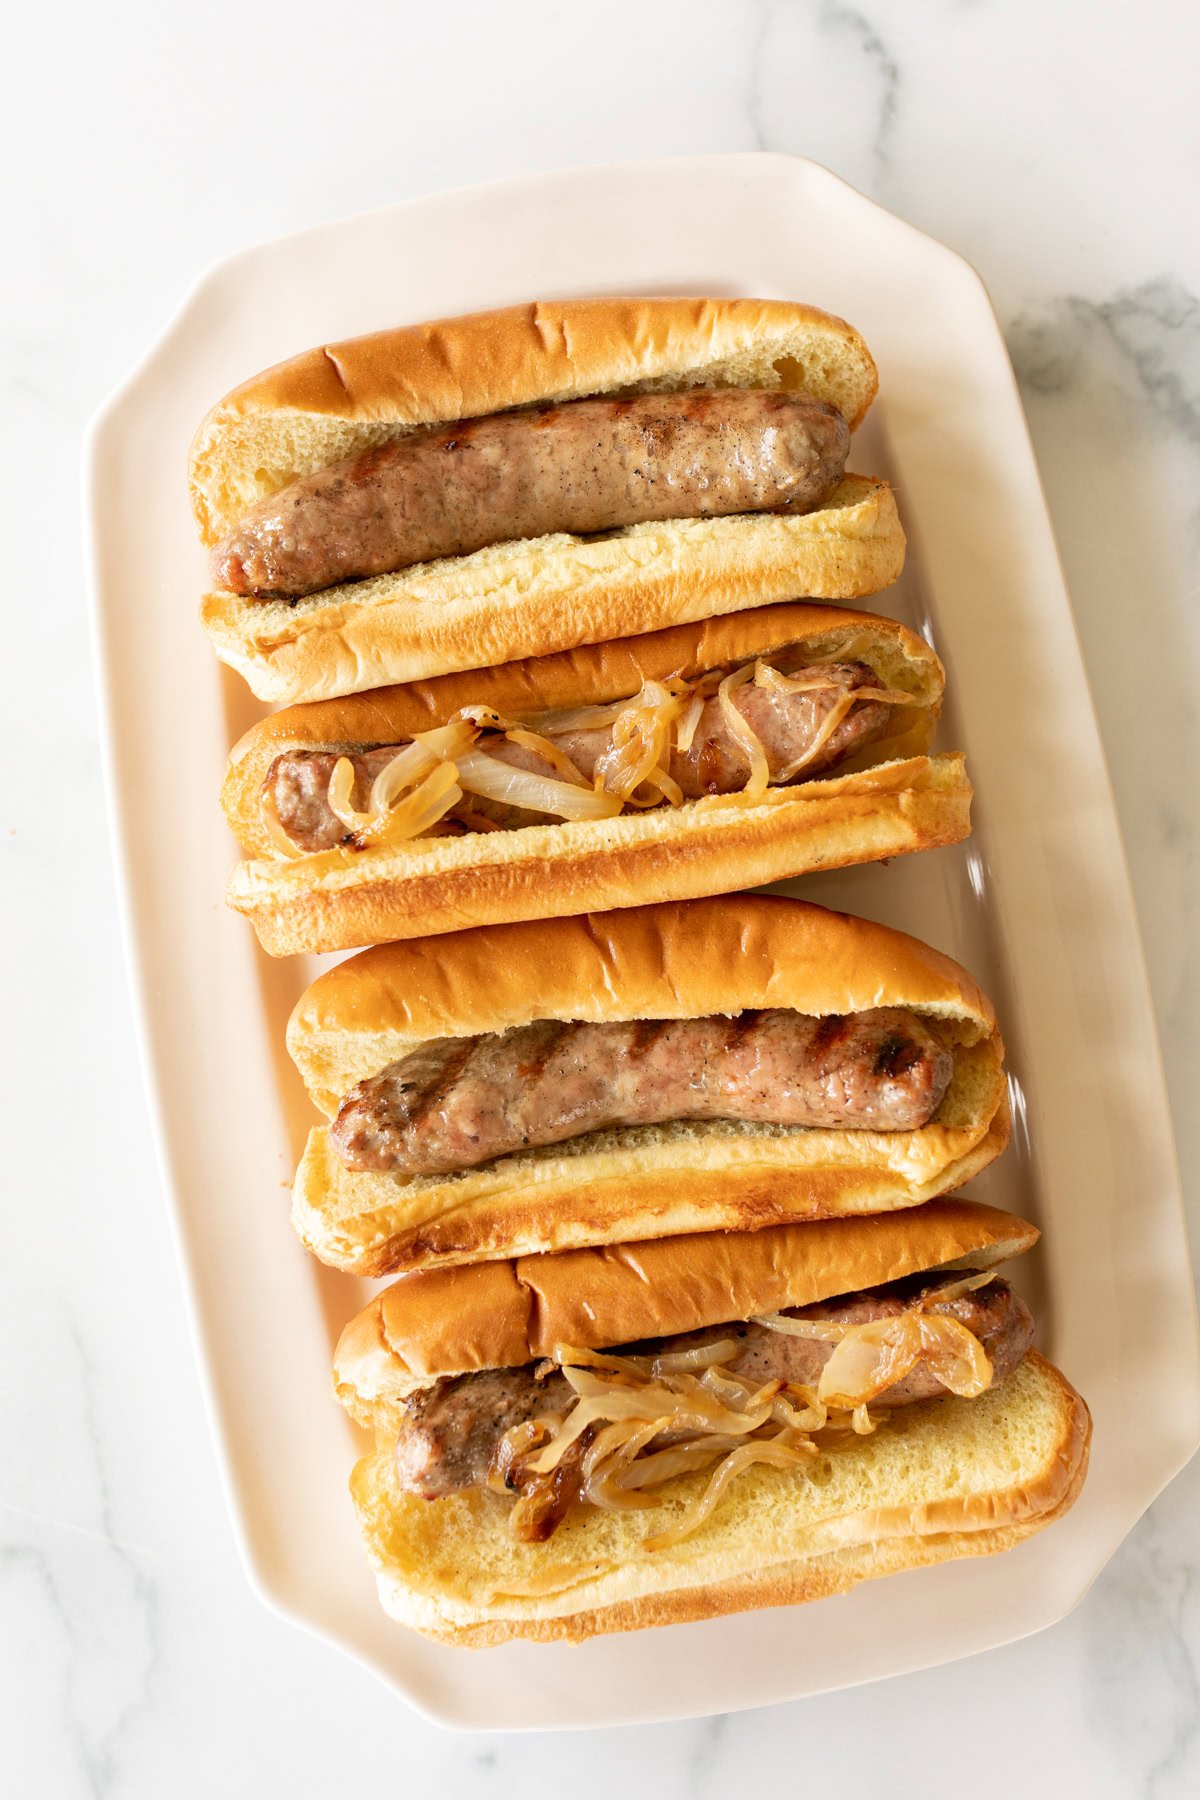 Four bratwursts in buns topped with cooked onions are arranged on a rectangular white plate on a marble surface.